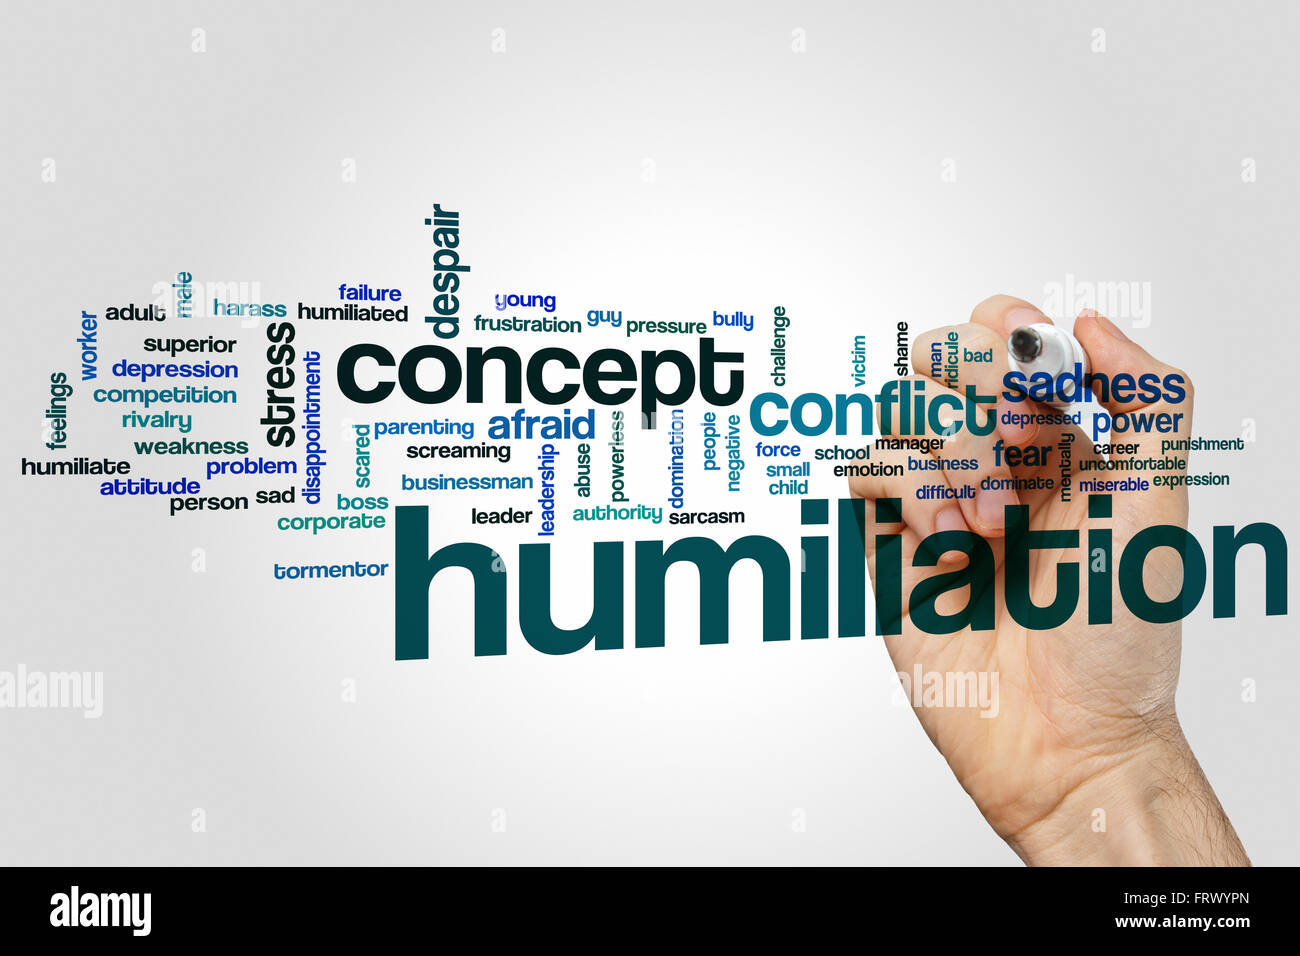 Humiliation word cloud concept with scared conflict related tags Stock Photo